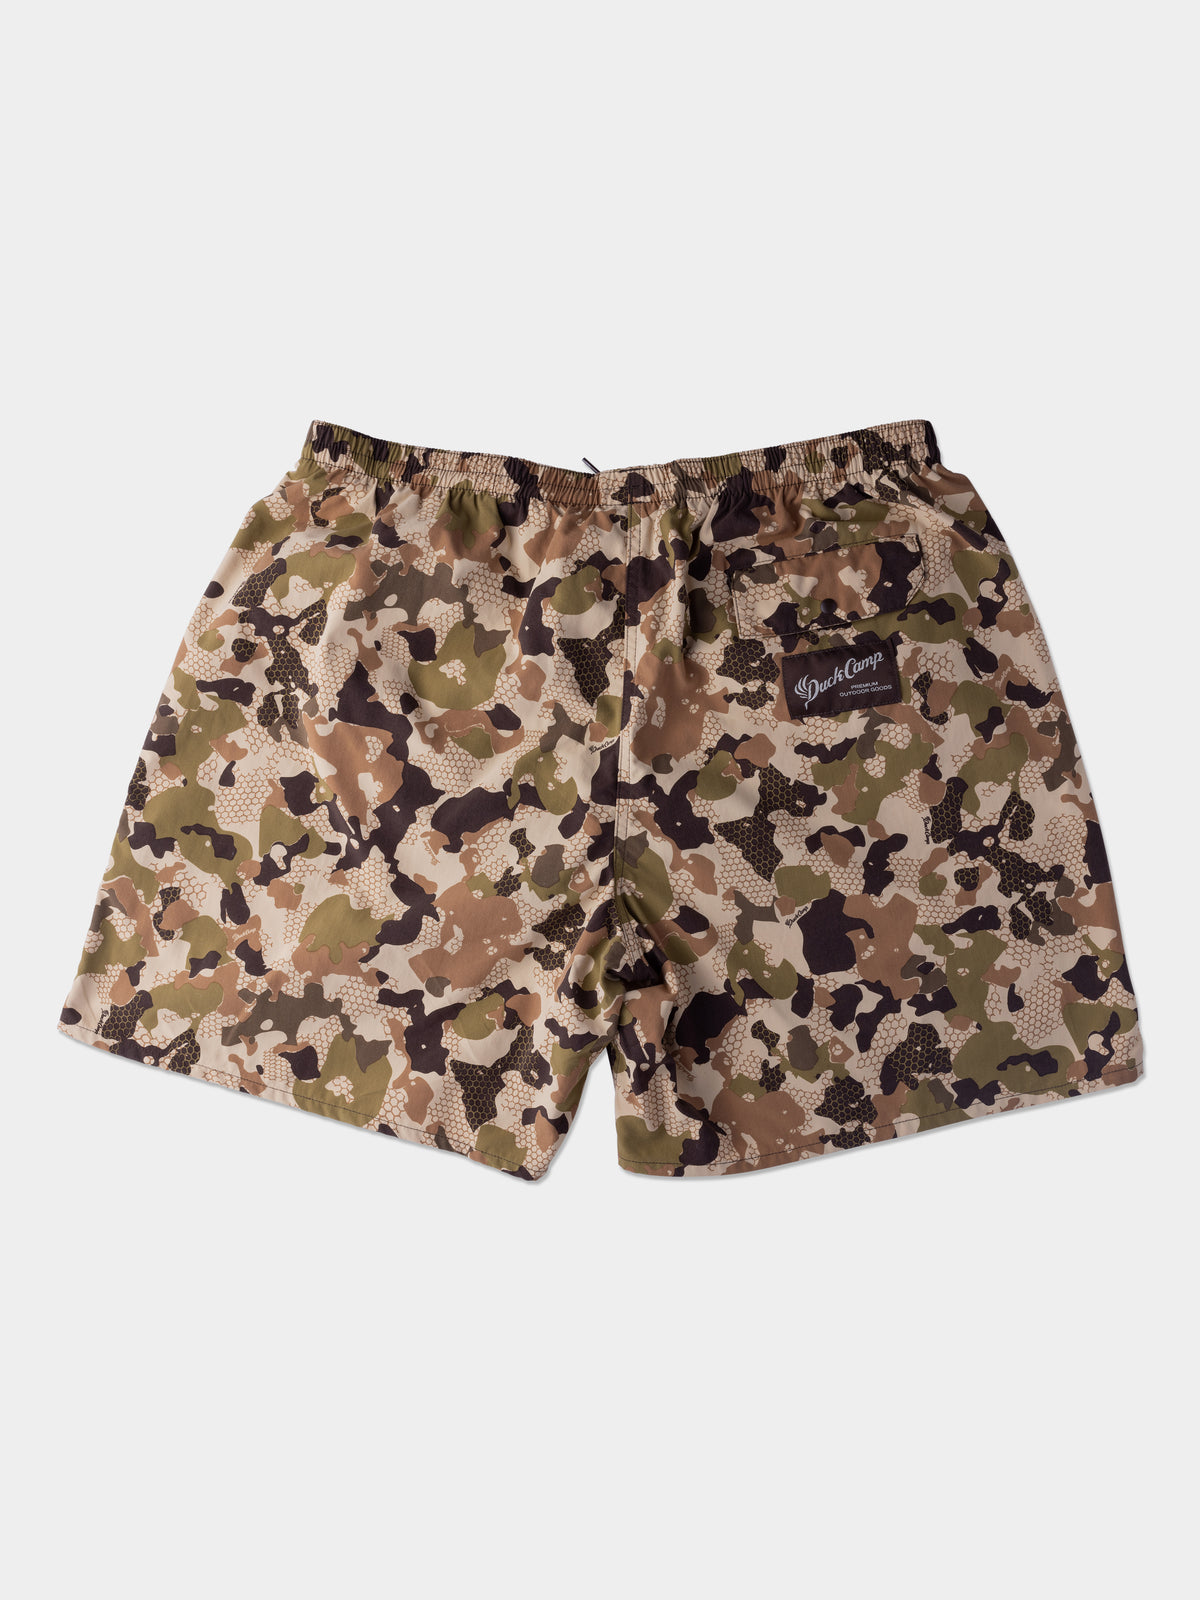 Duck Camp Scout Shorts 7 - Wetland Camouflage | Hunting Shorts, Swim Trunks, S / 7